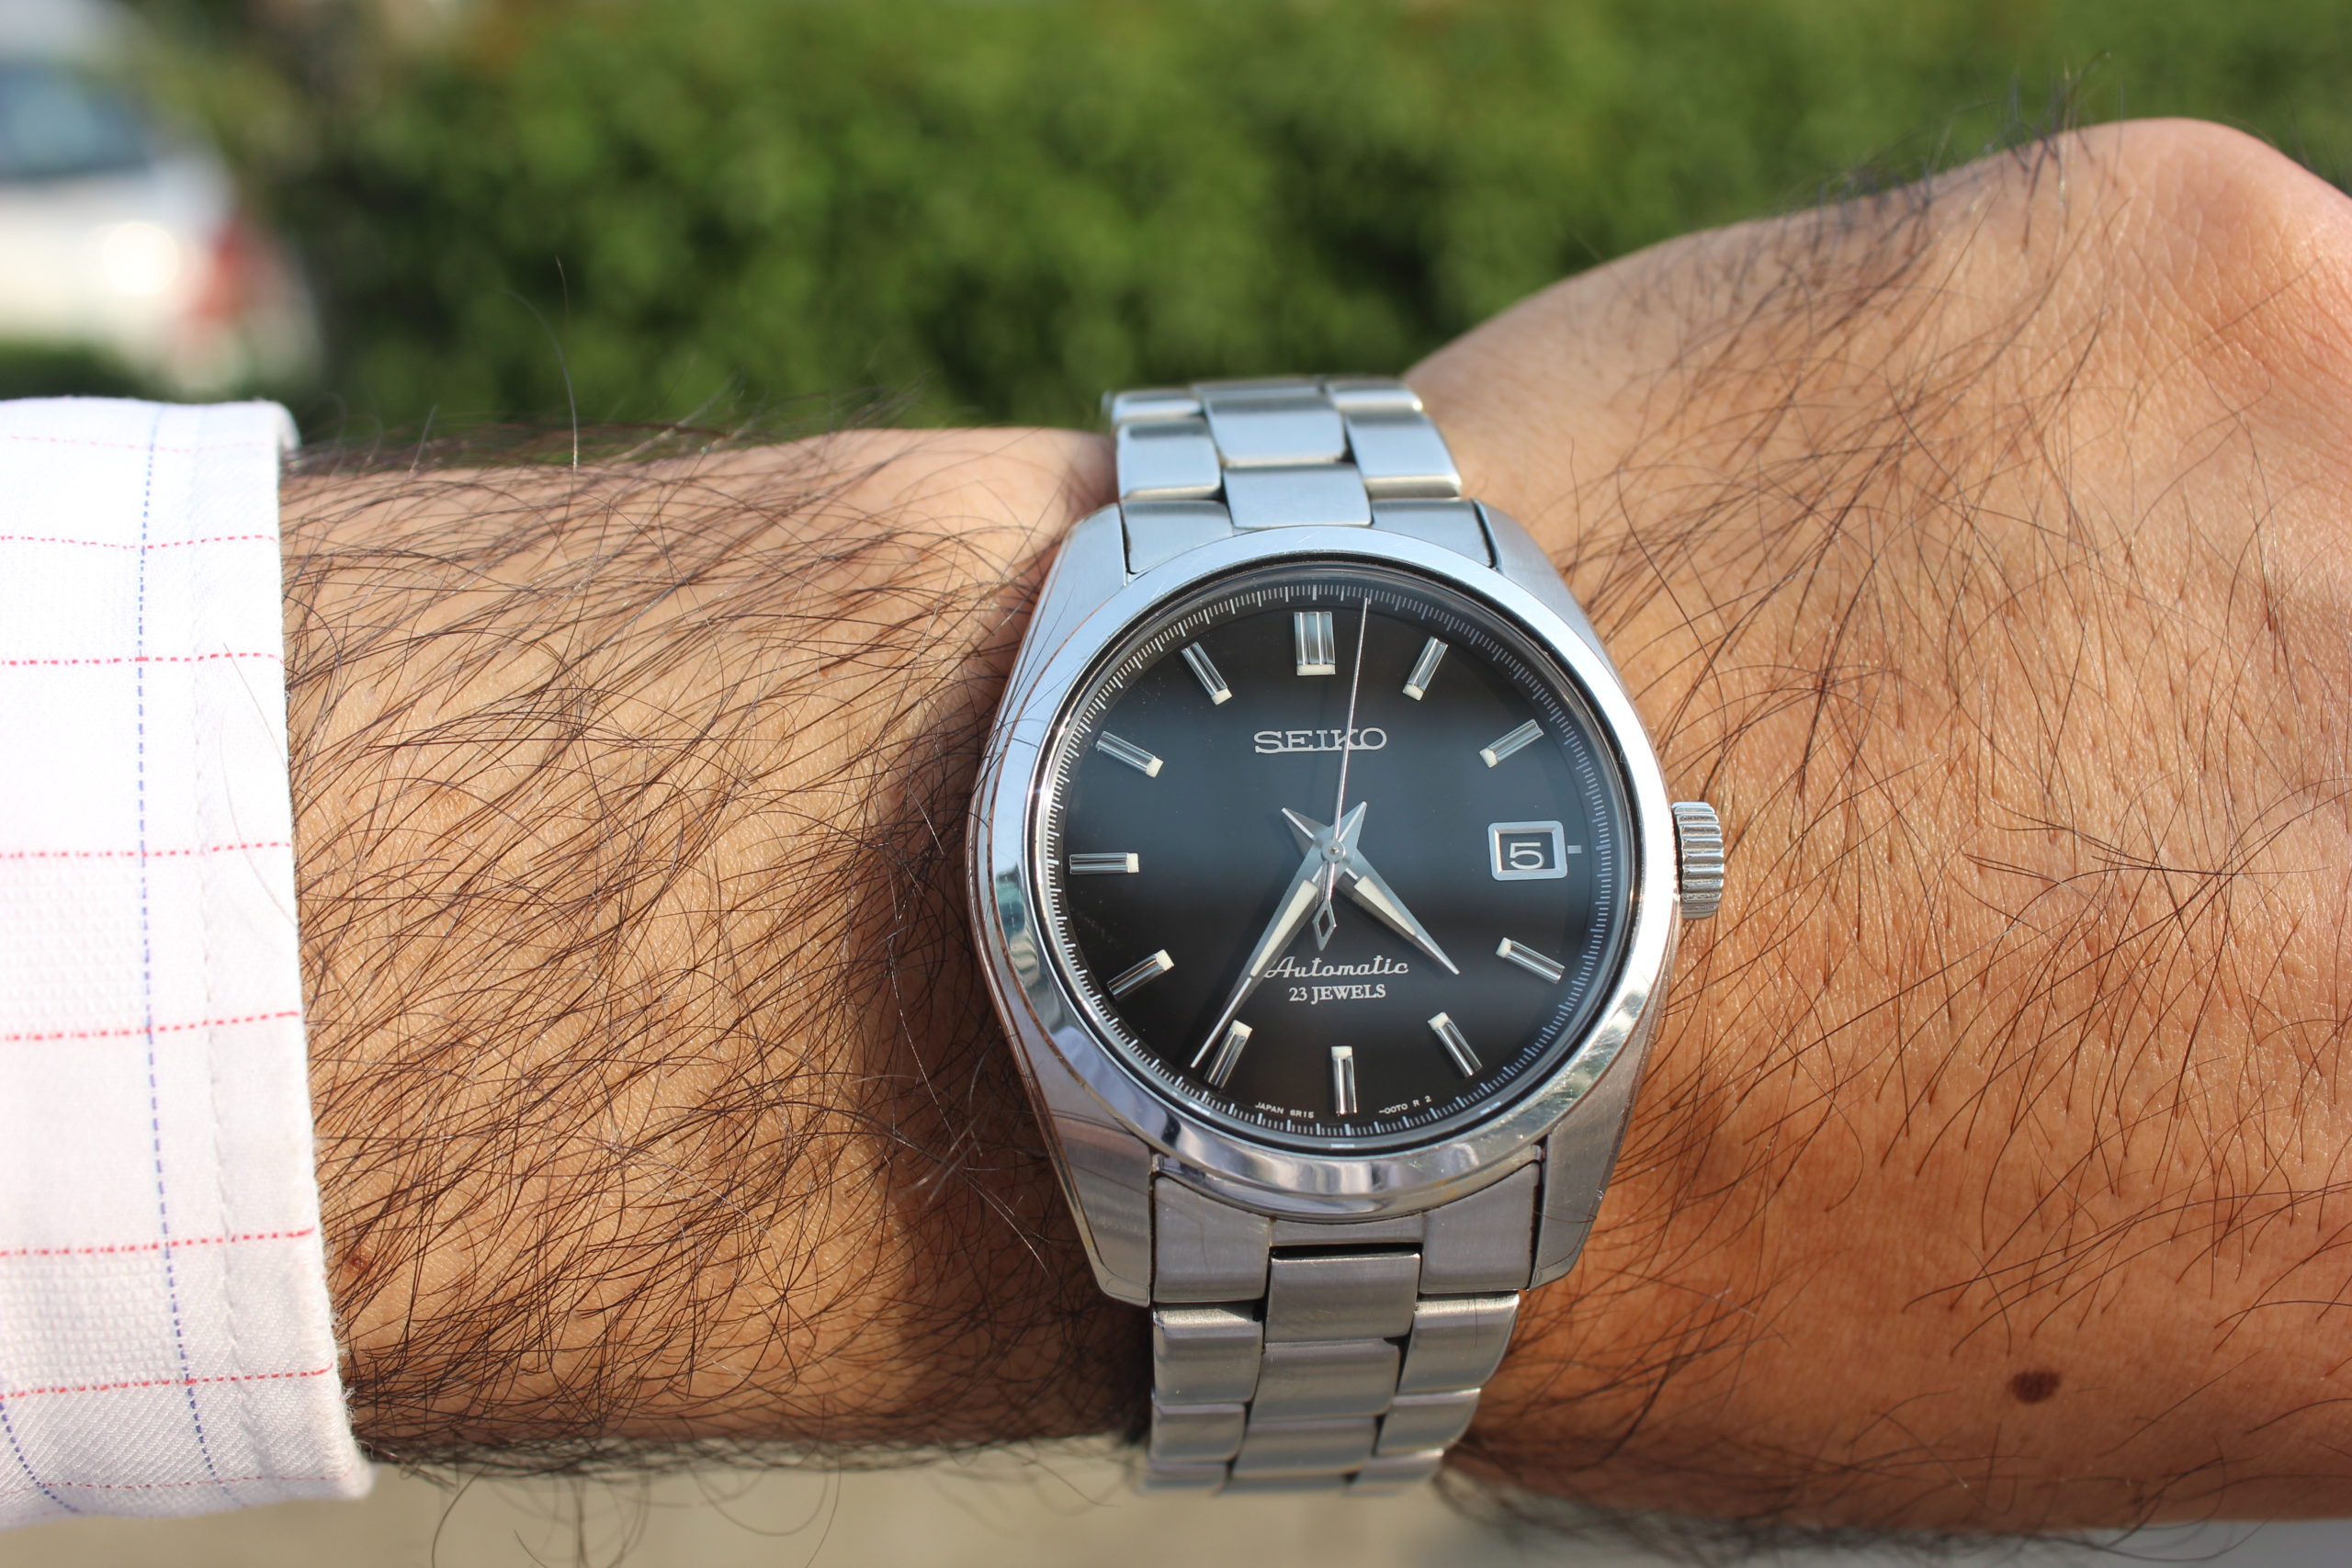 Seiko SARB033 Automatic Watch – WristReview.com – Featuring Watch Reviews, Critiques, Reports News